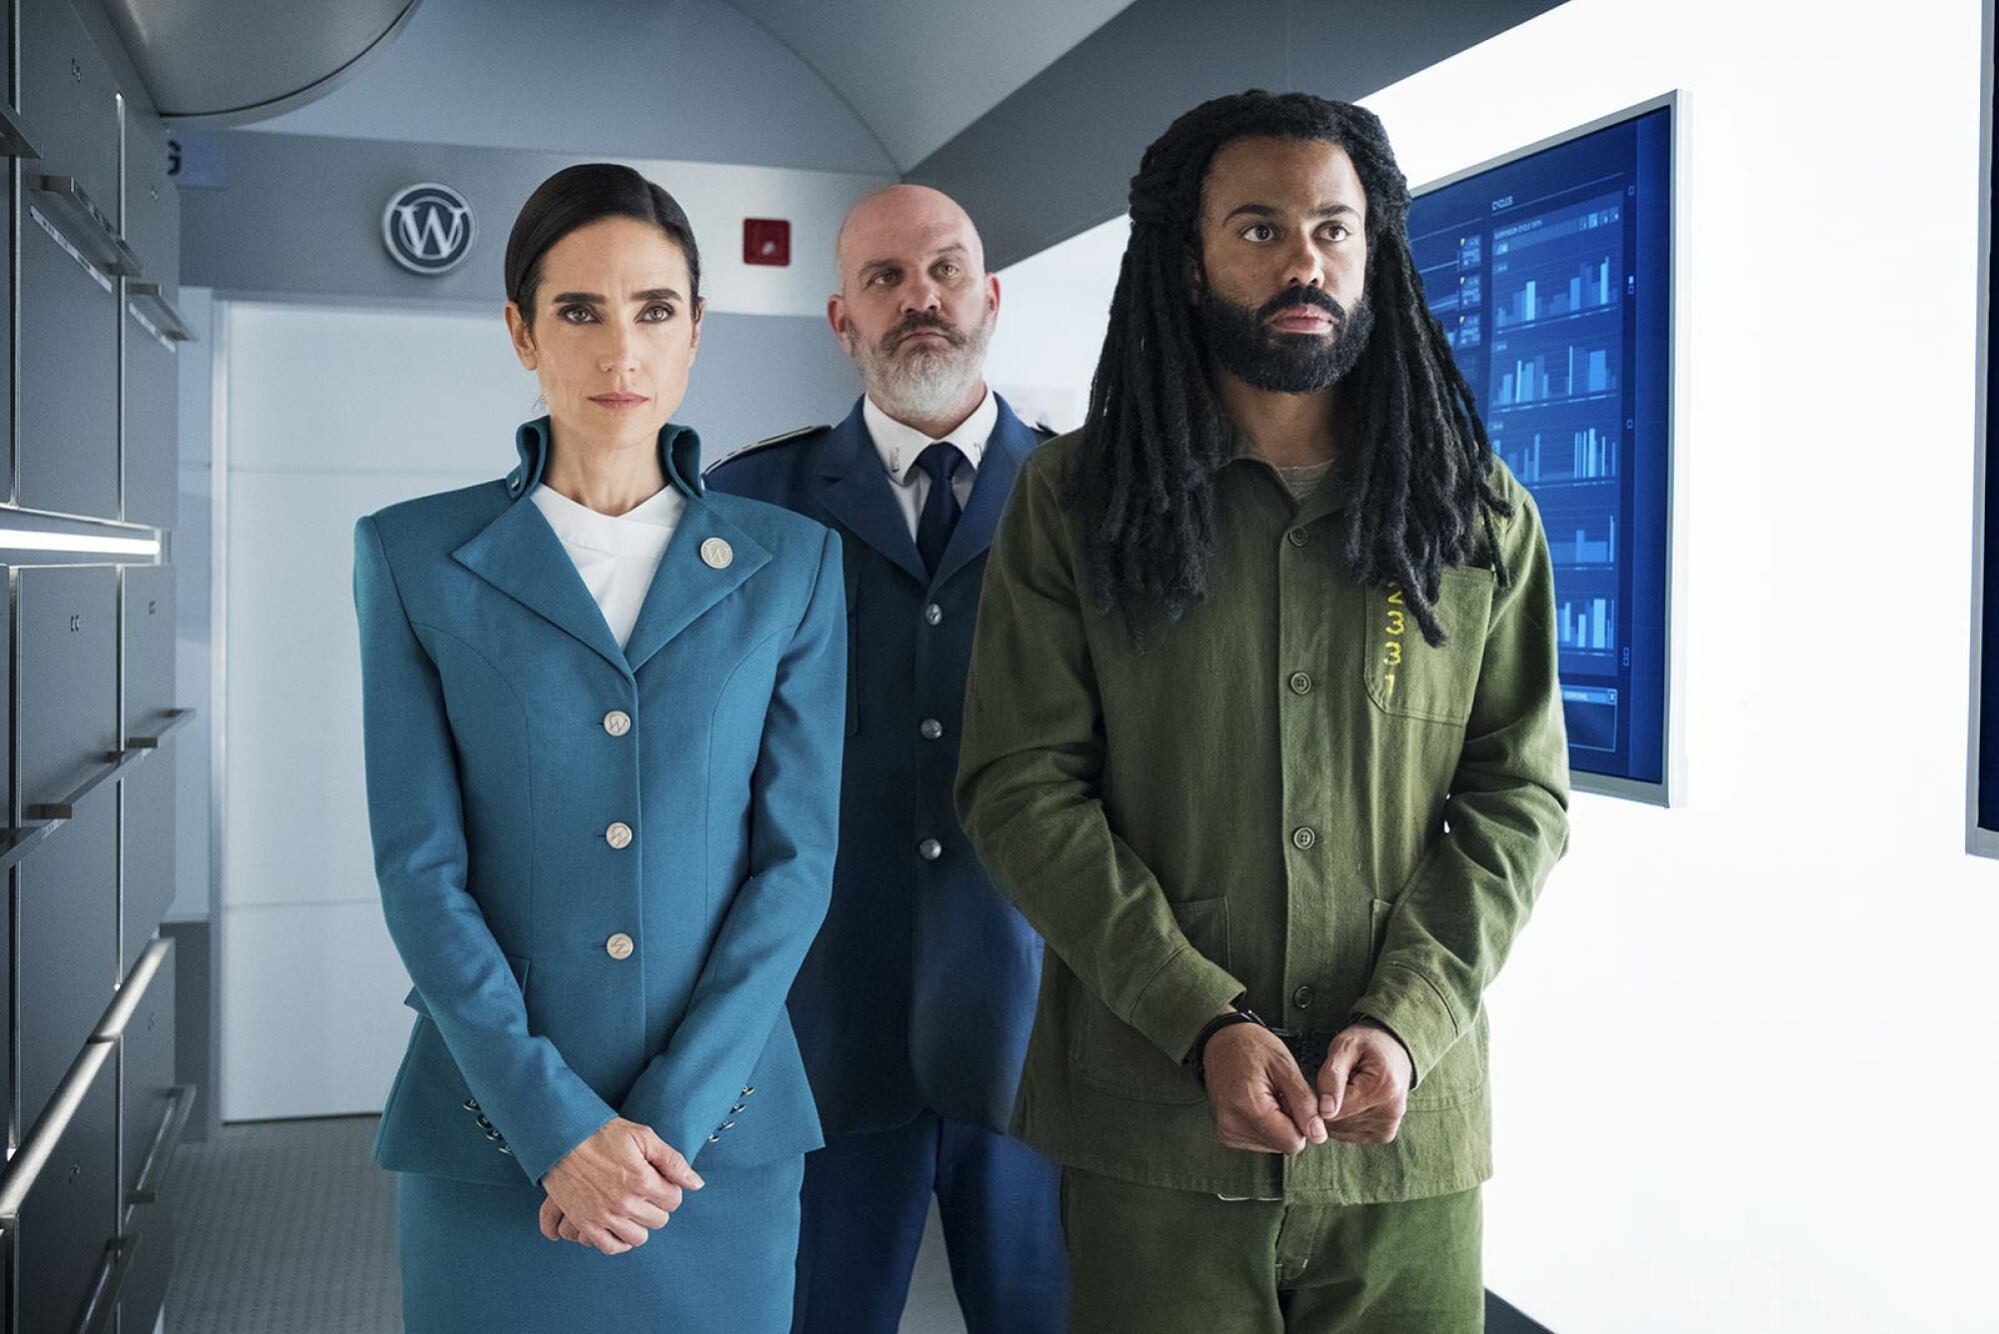 Jennifer Connelly stands next to Daveed Diggs who is in handcuffs